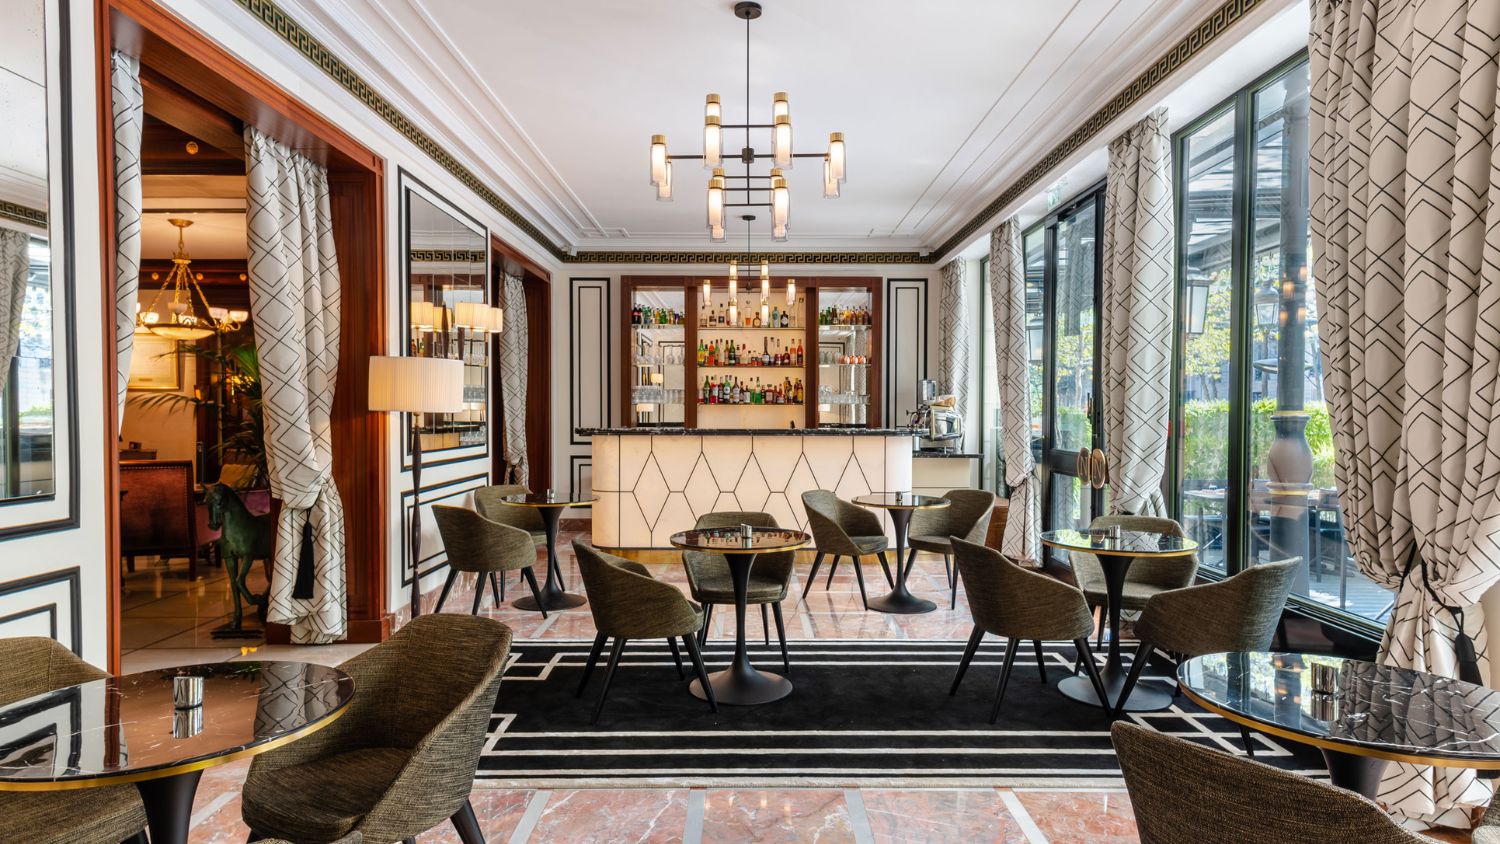 The Bar 1807 at Hotel Napoleon Paris. Private, yet bright, The Bar 1807 reveals an Art Deco style influenced by the 1930s.